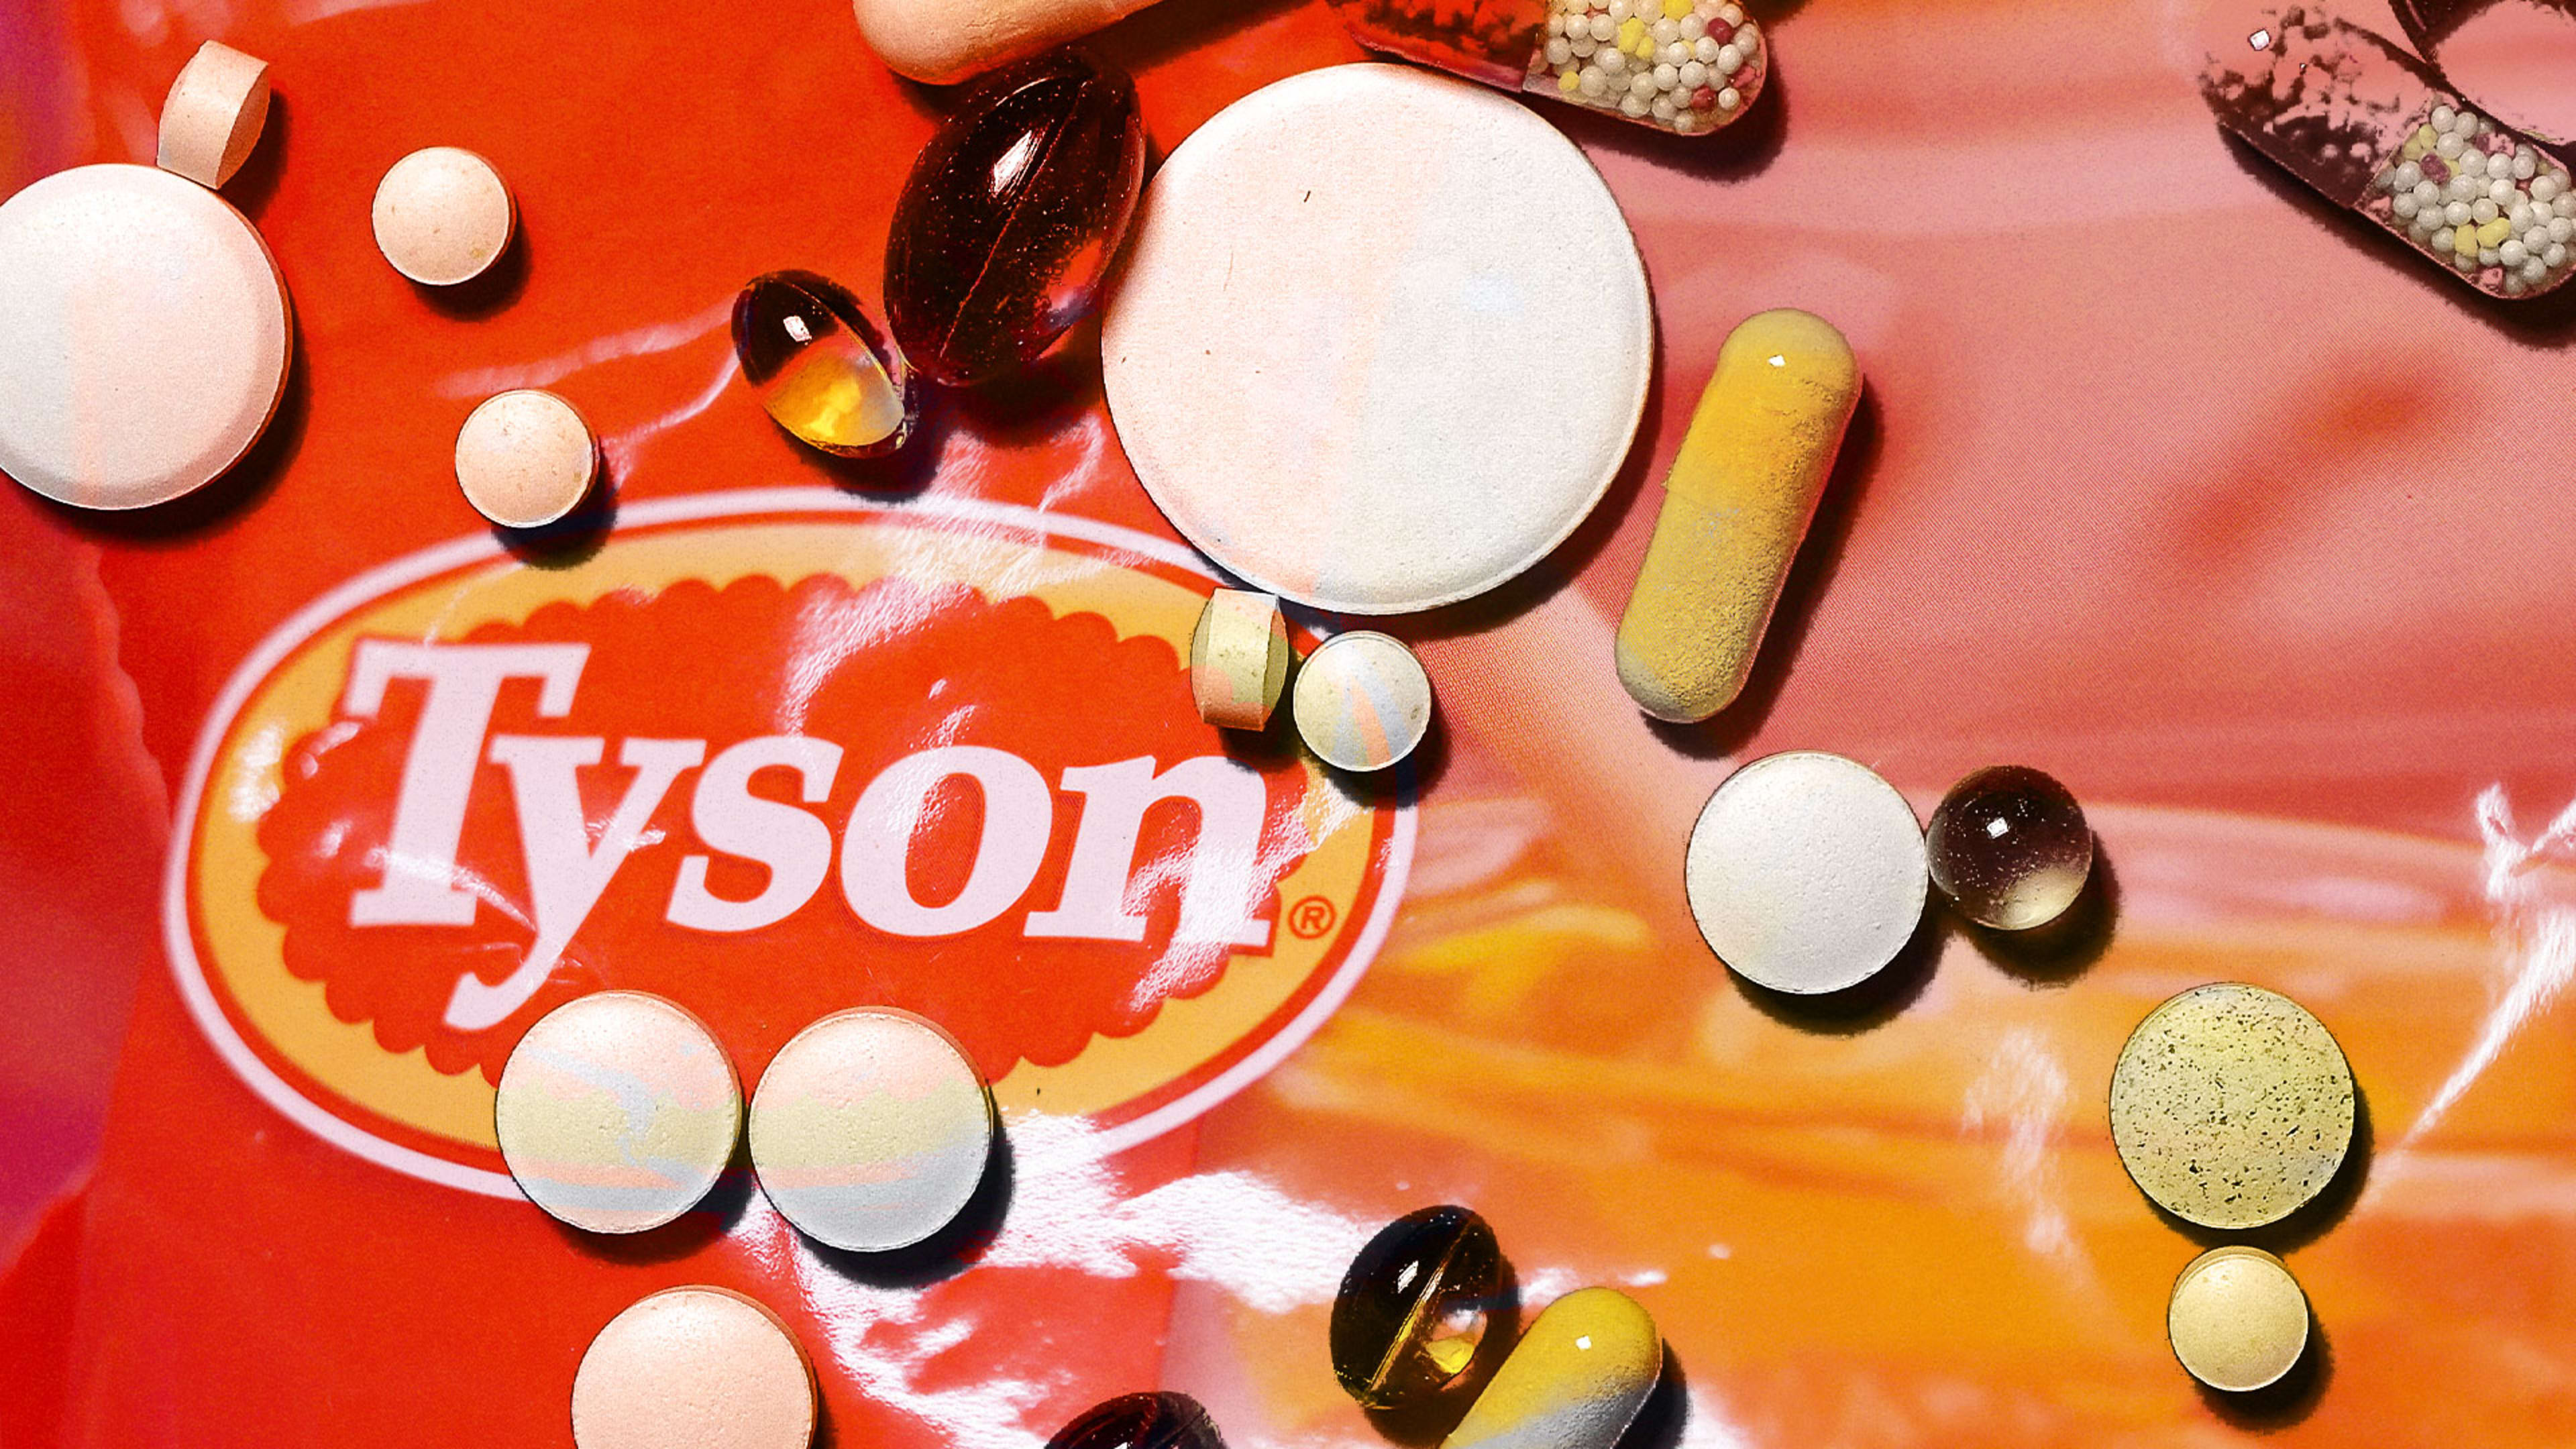 Tyson Foods dropped CVS Caremark in a pharma benefits shake-up. Could it be the start of a drug cost revolt?